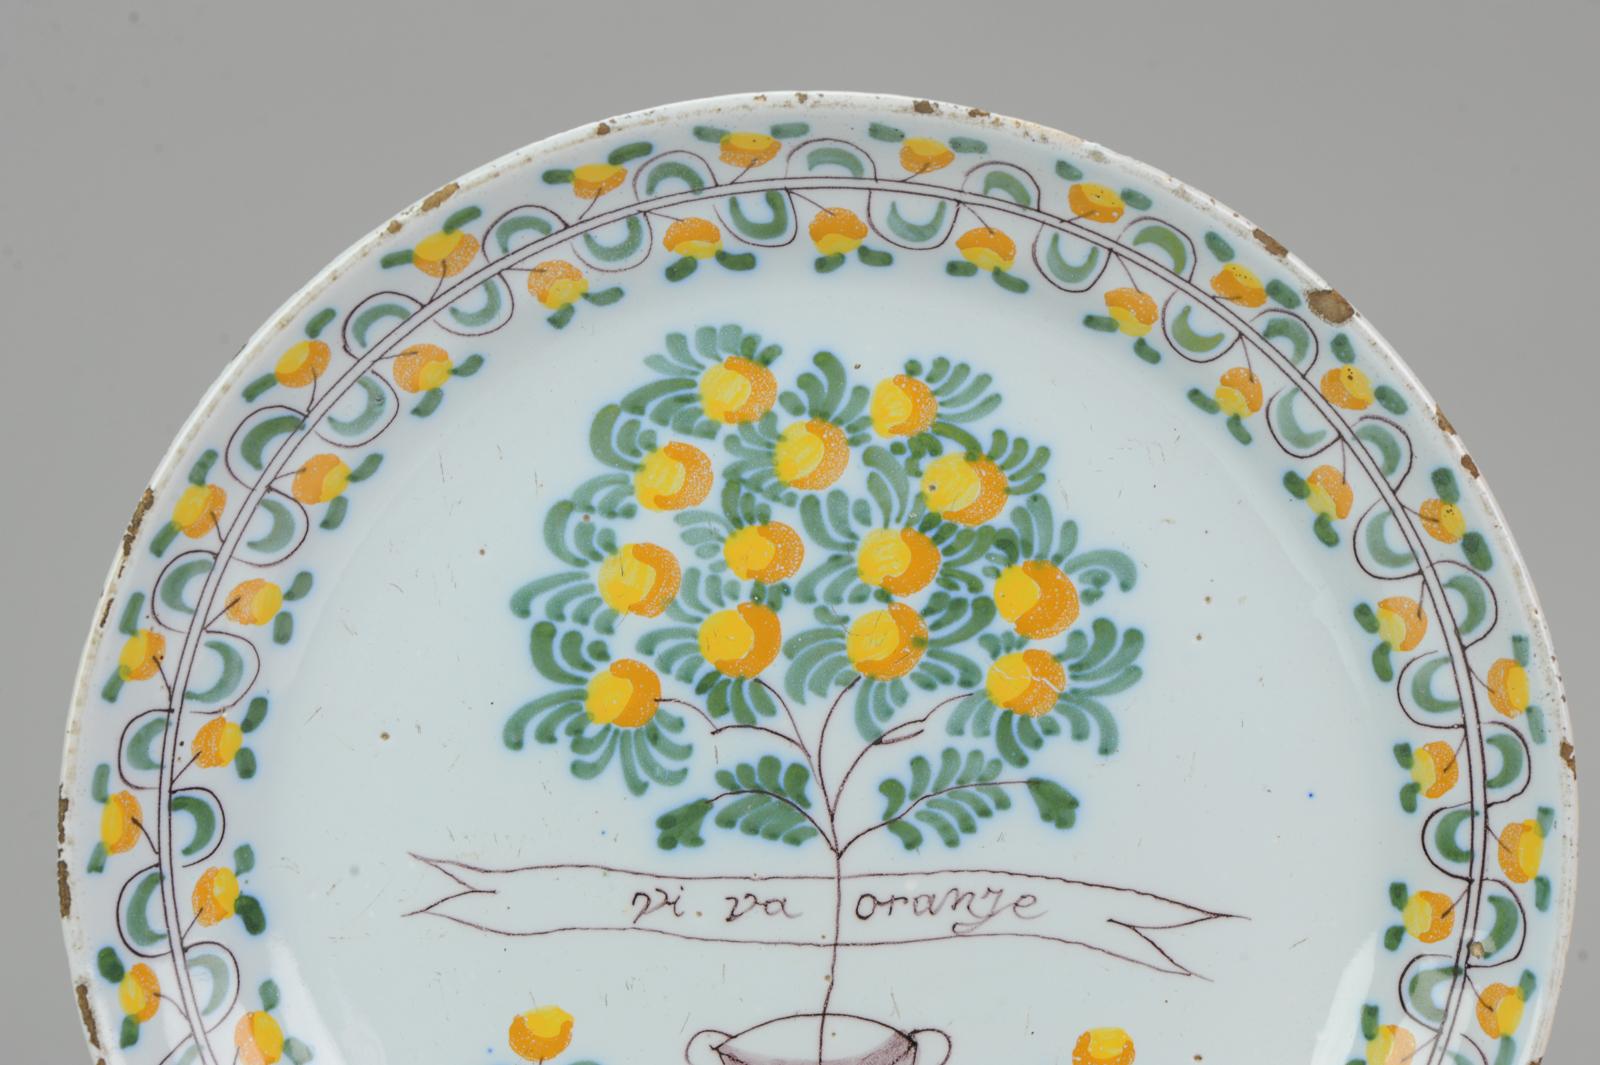 Other Antique Ca 1900 French Plate with ViVA Oranje Faience Willem V For Sale